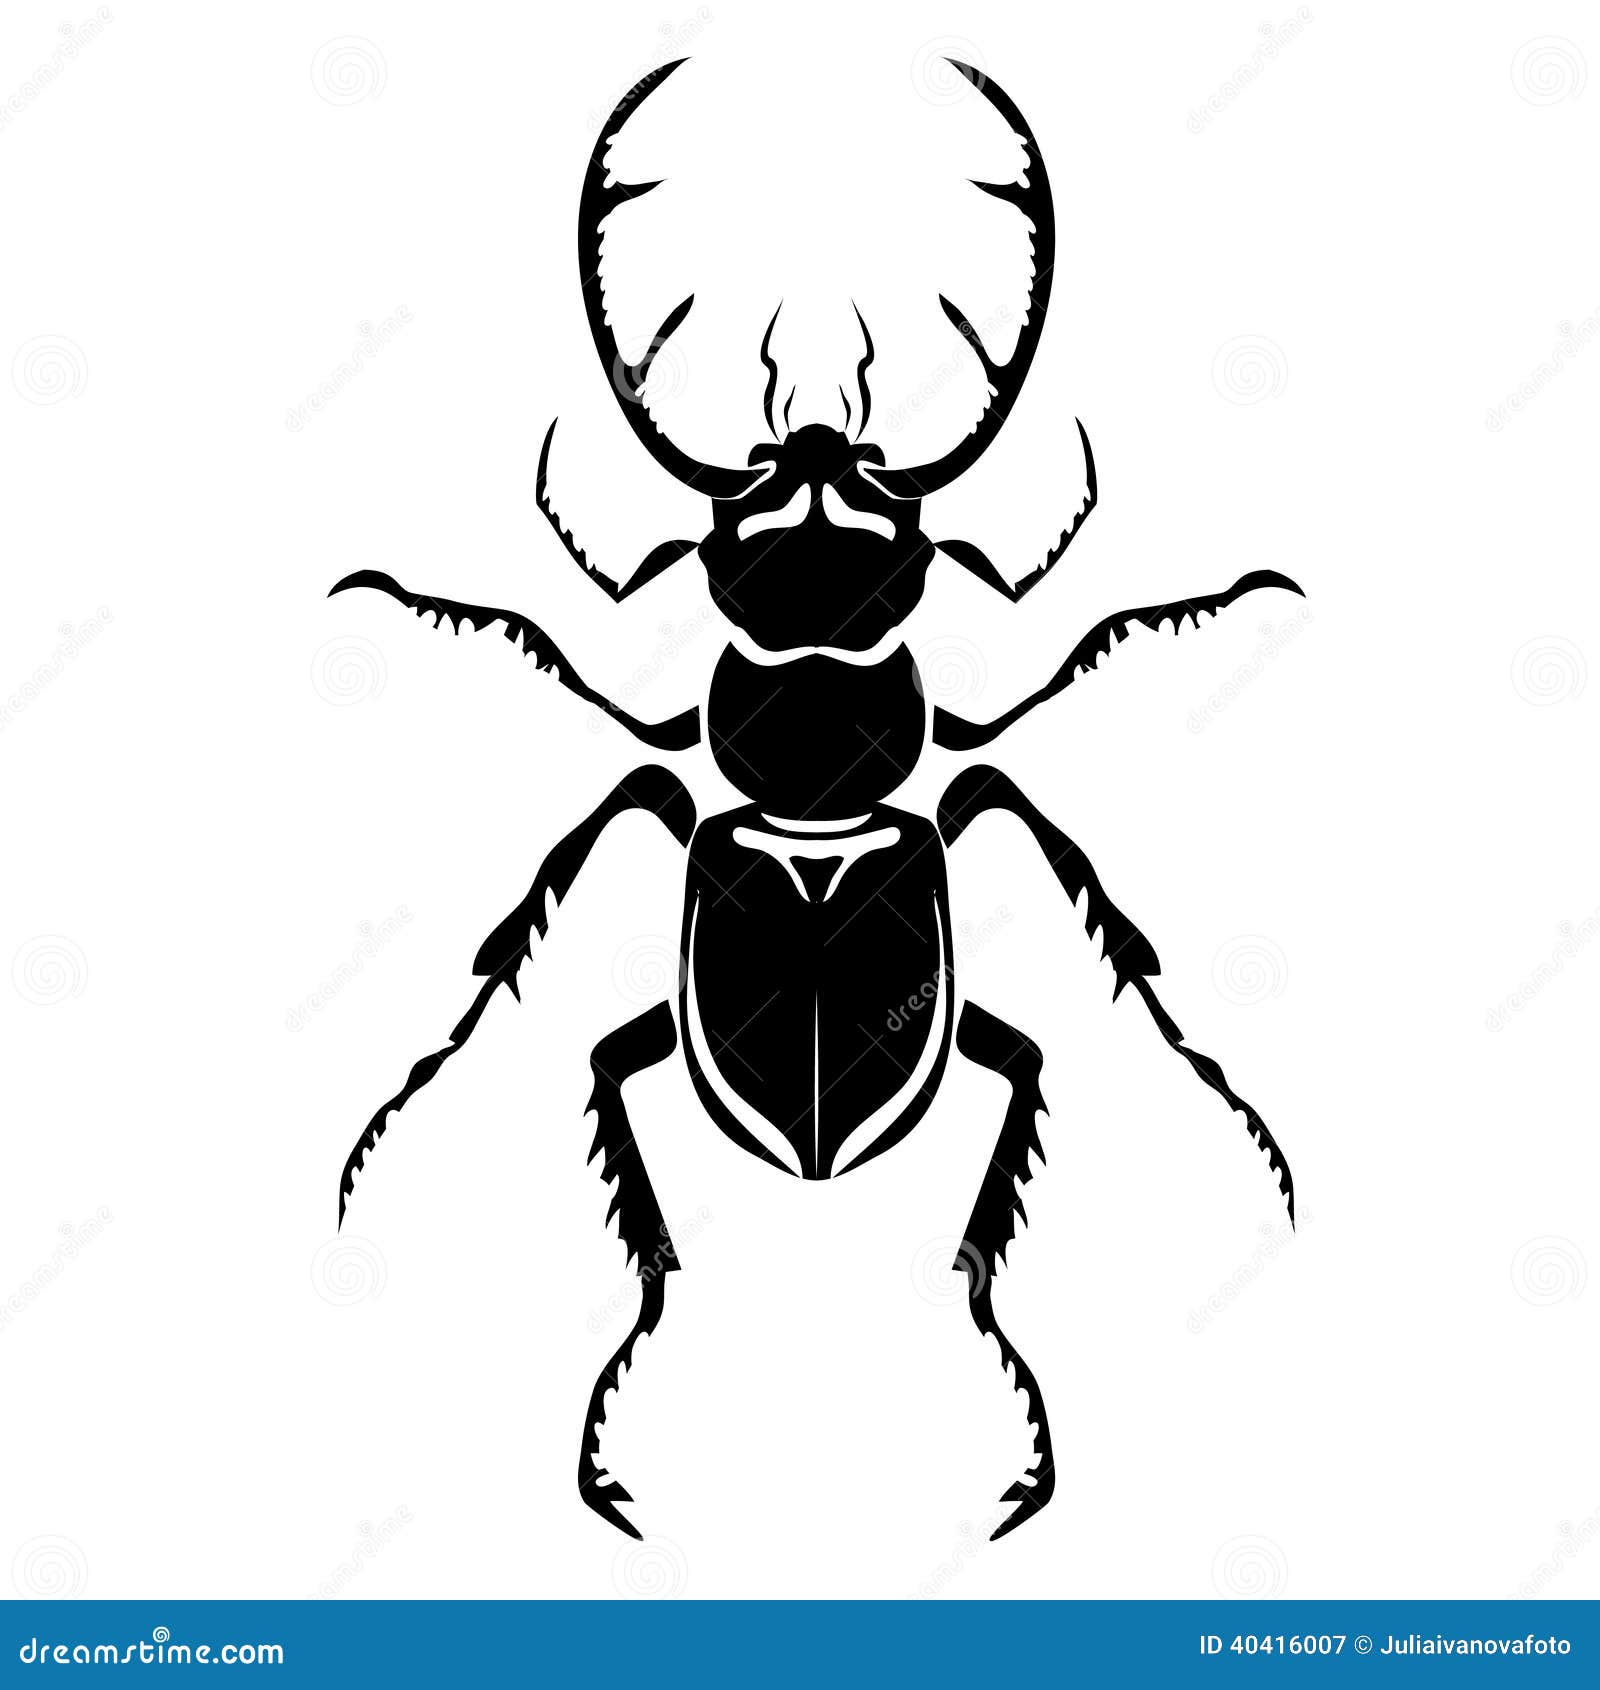 Black stag beetle stock vector. Illustration of picture - 40416007